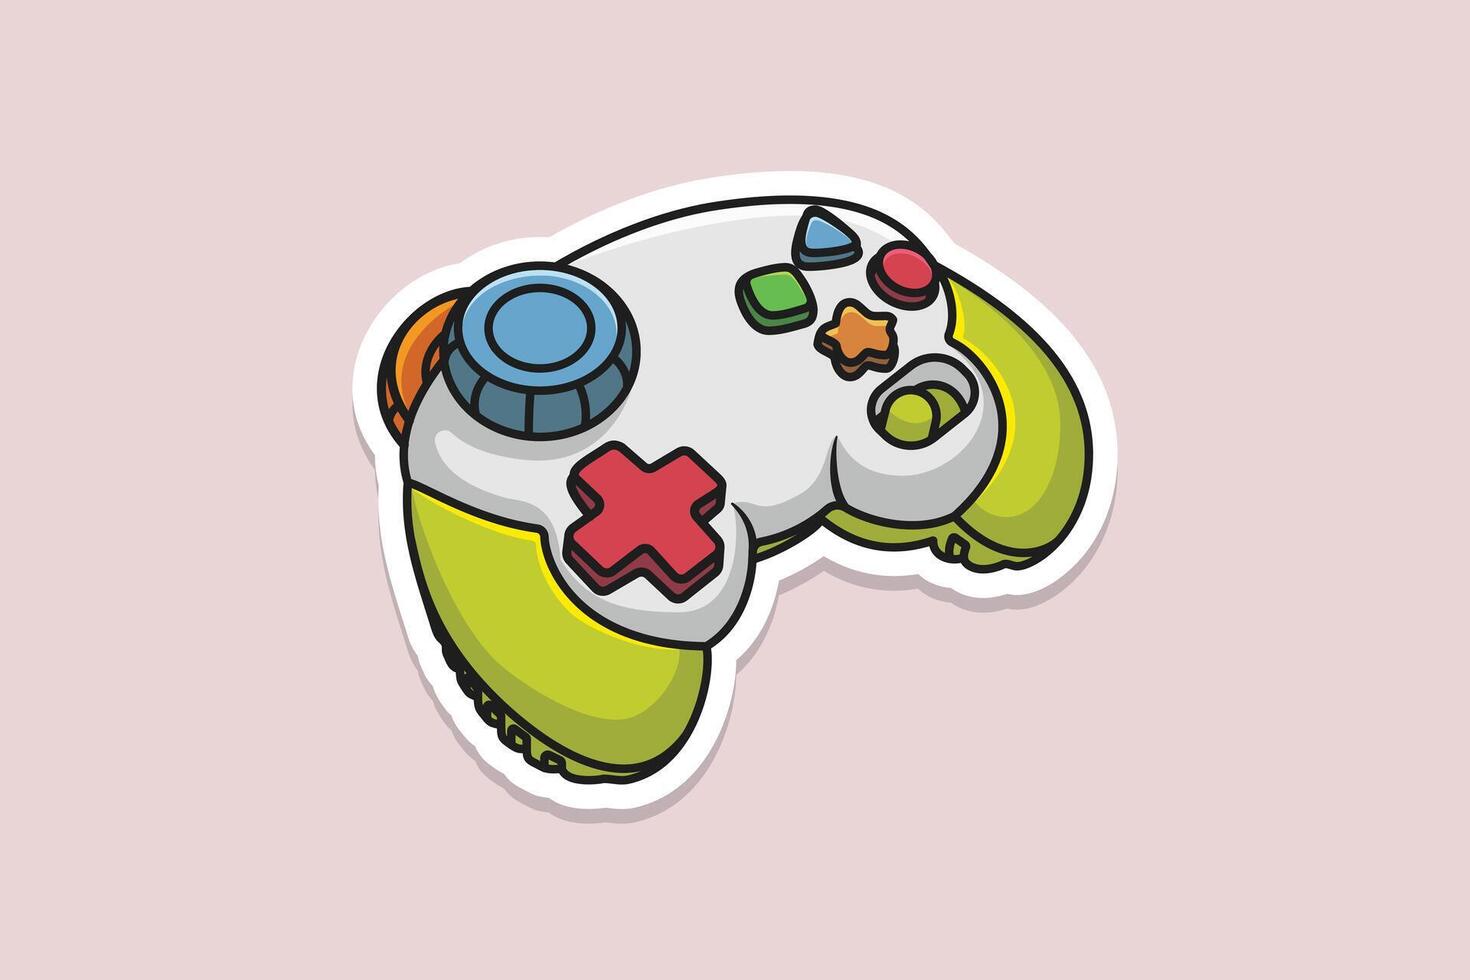 Joystick Controller and Game Pad Stick Sticker vector illustration. Sports and technology gaming objects icon concept. Video game controller or game console sticker logo design with shadow.